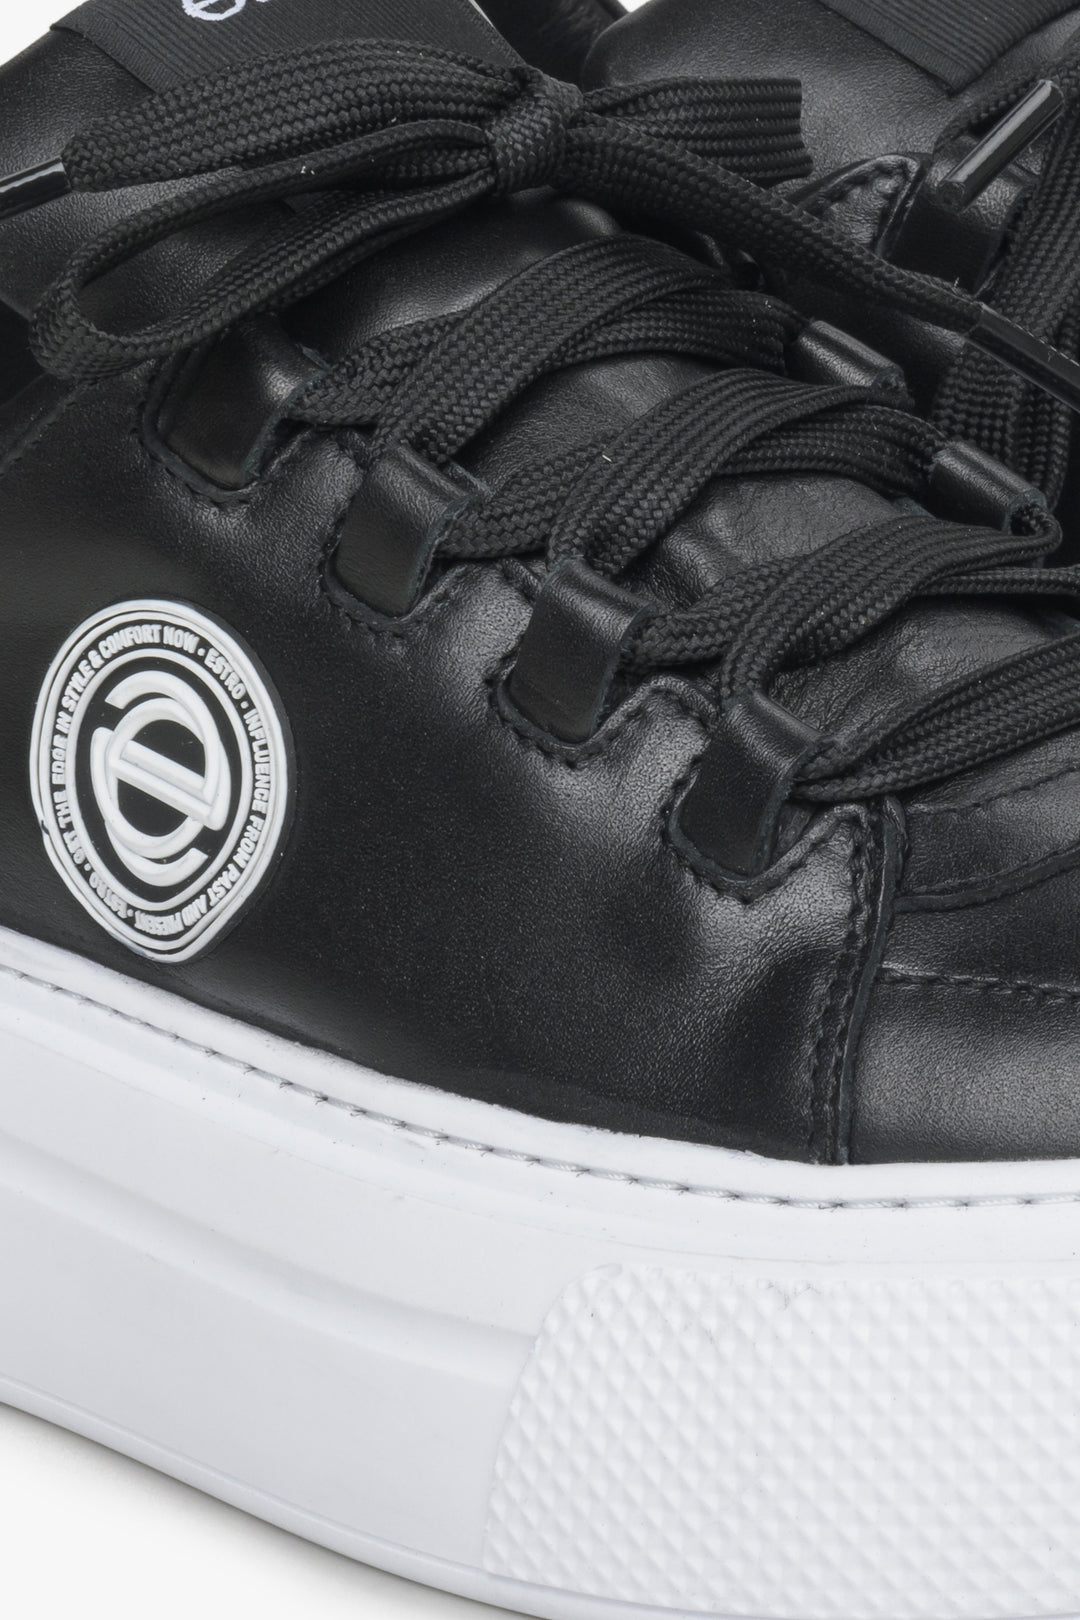 Women's black sneakers made of genuine leather - close-up on details.